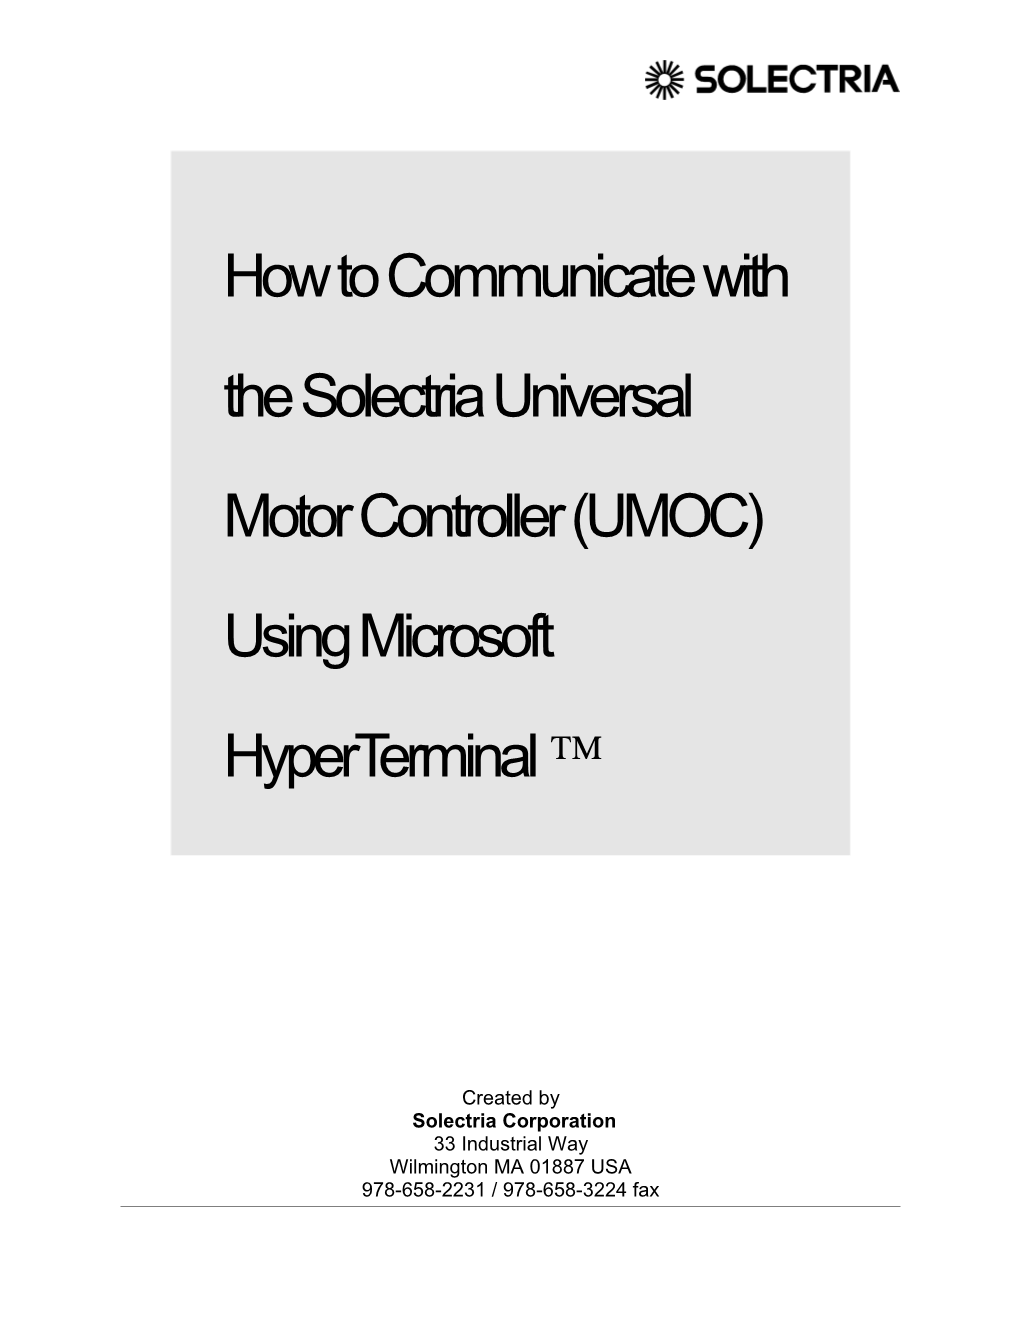 How to Communicate with the Solectria Universal Motor Controller (UMOC) Using Microsoft